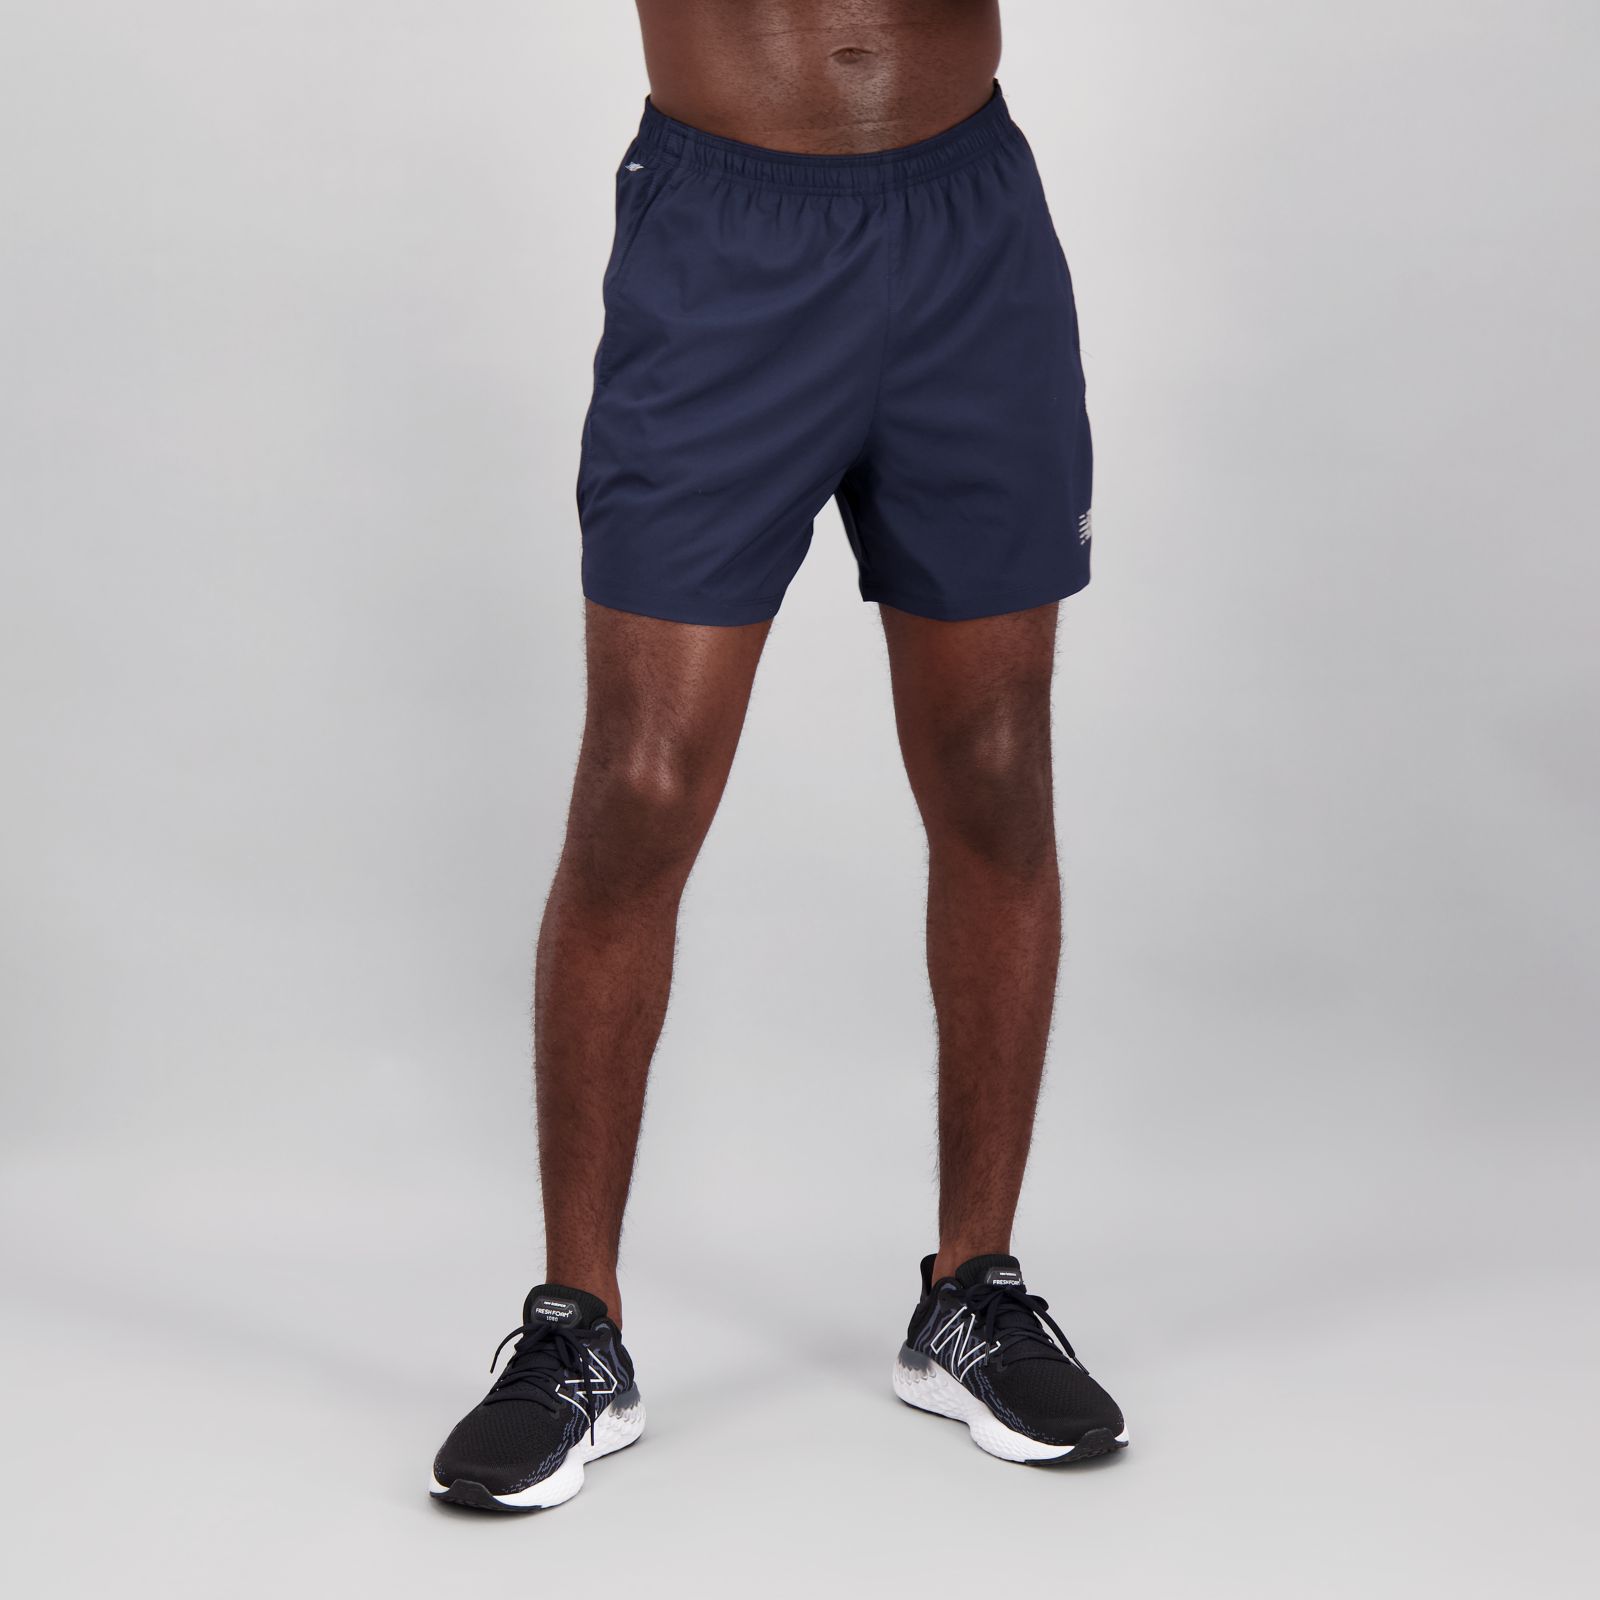 New Balance Accelerate Shorts Are the Best Shorts for Men